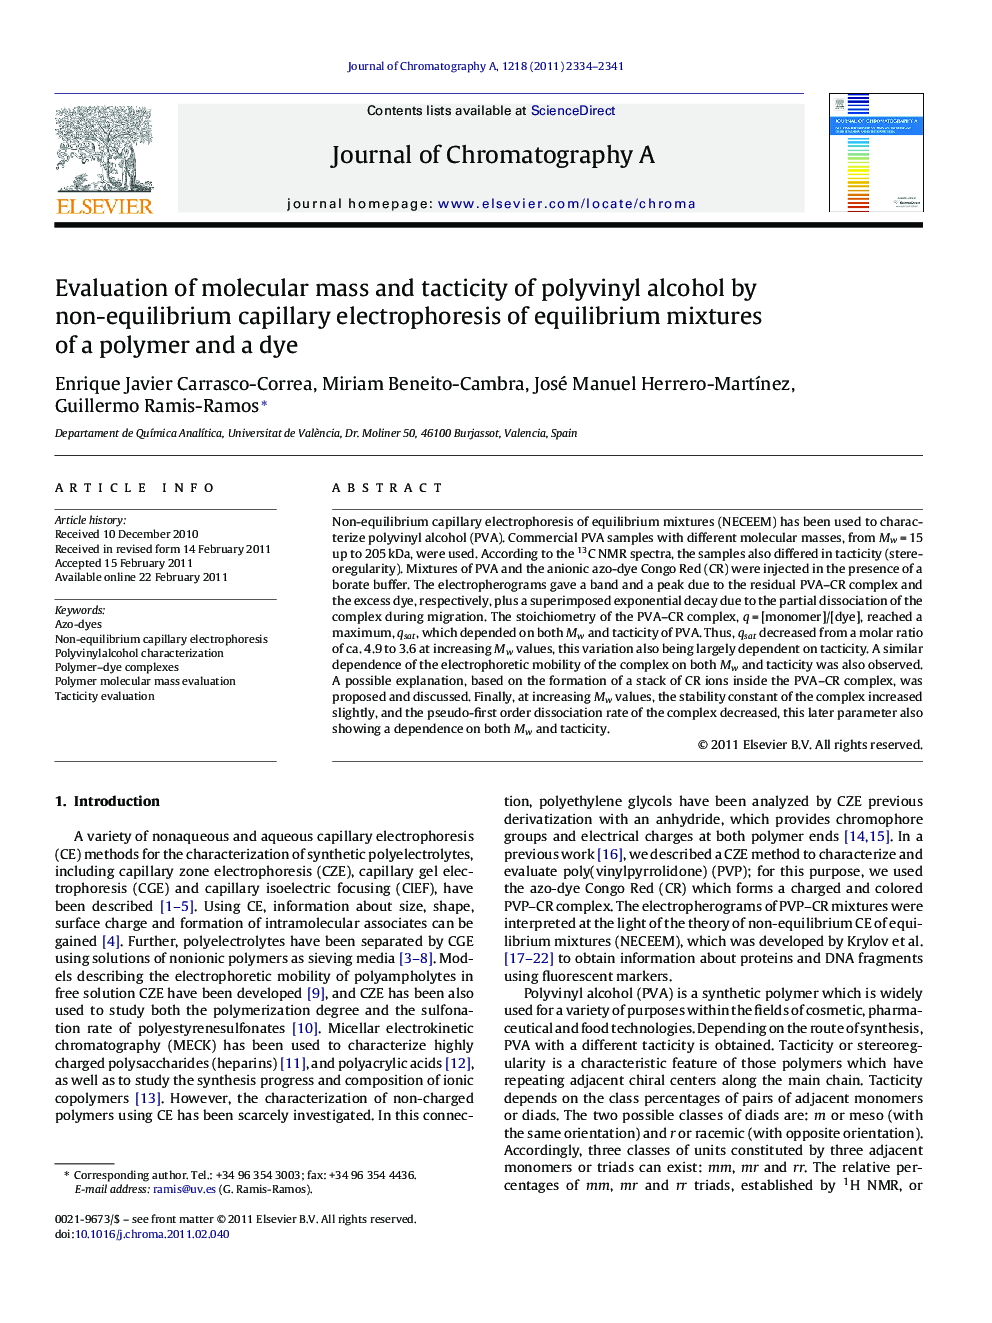 Evaluation of molecular mass and tacticity of polyvinyl alcohol by non-equilibrium capillary electrophoresis of equilibrium mixtures of a polymer and a dye